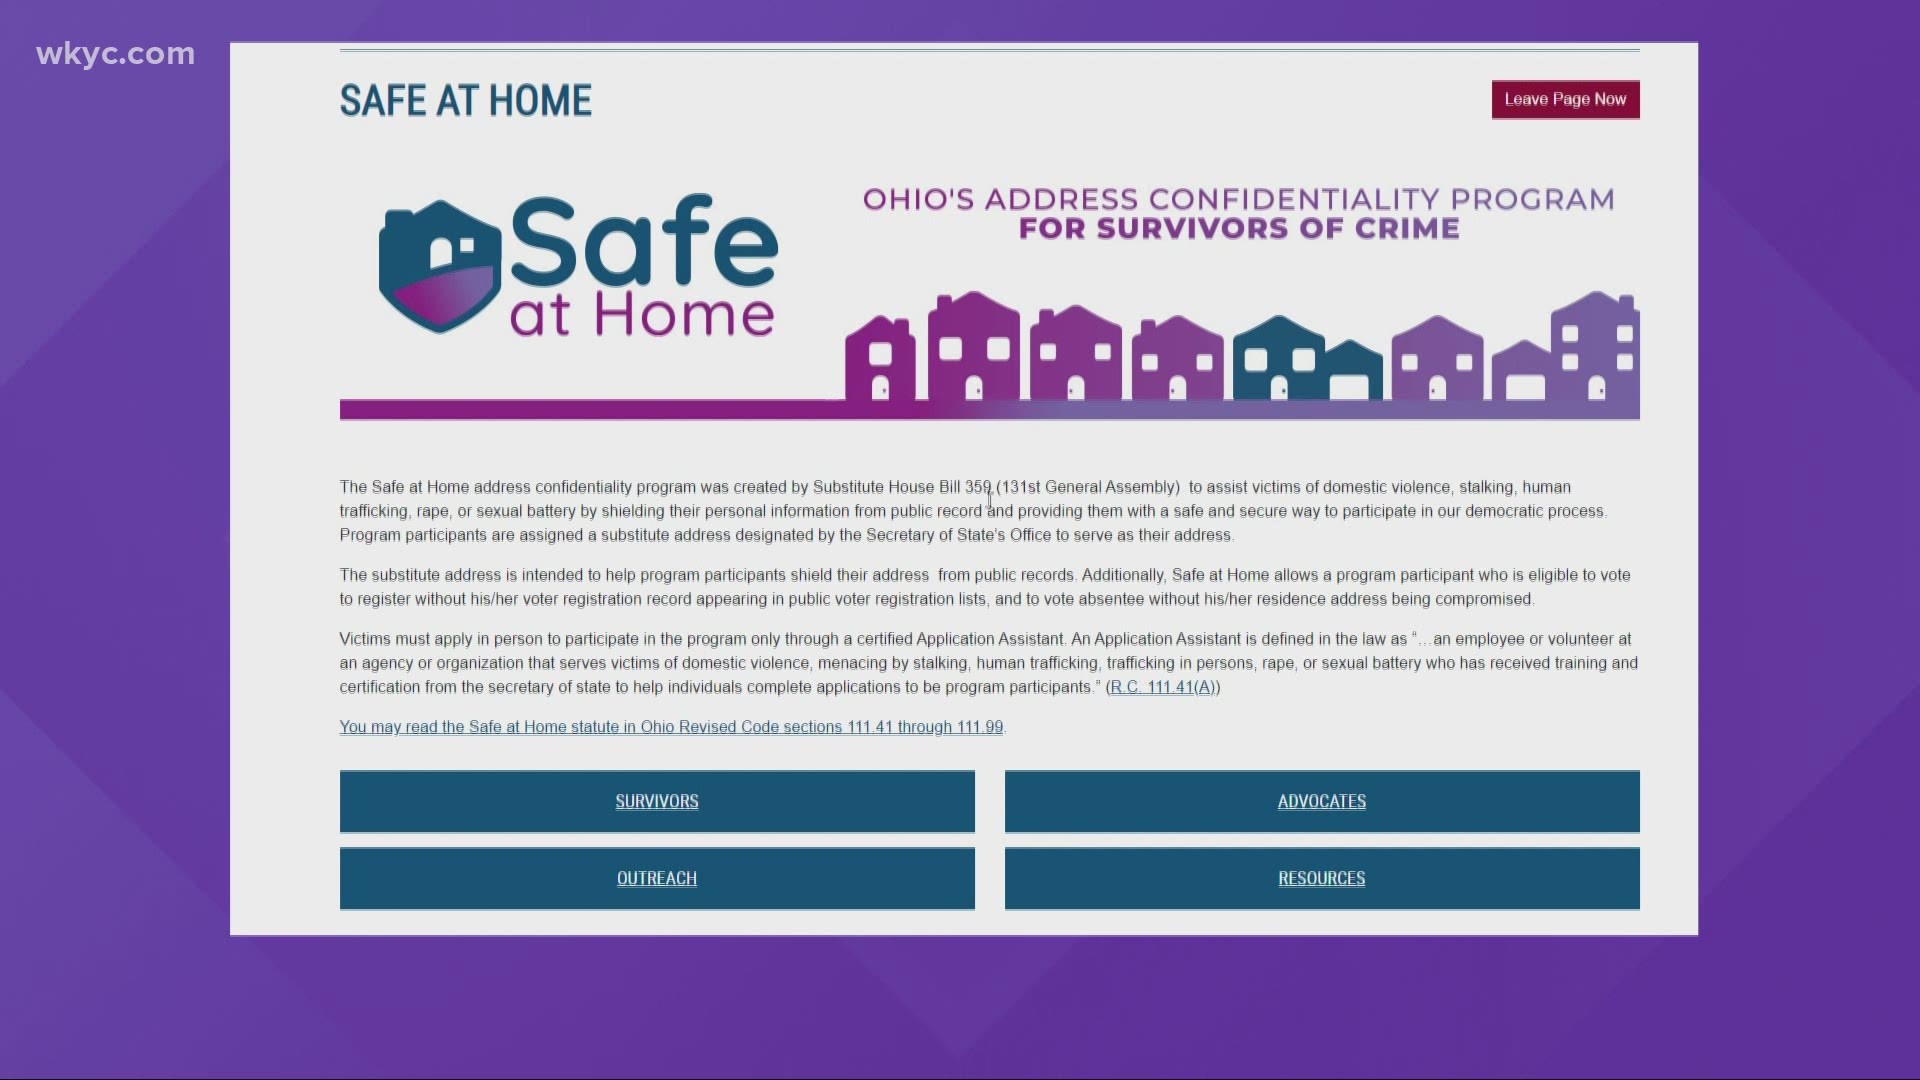 Safe At Home is a free program, but survivors need an advocate and documented reasons to access it.